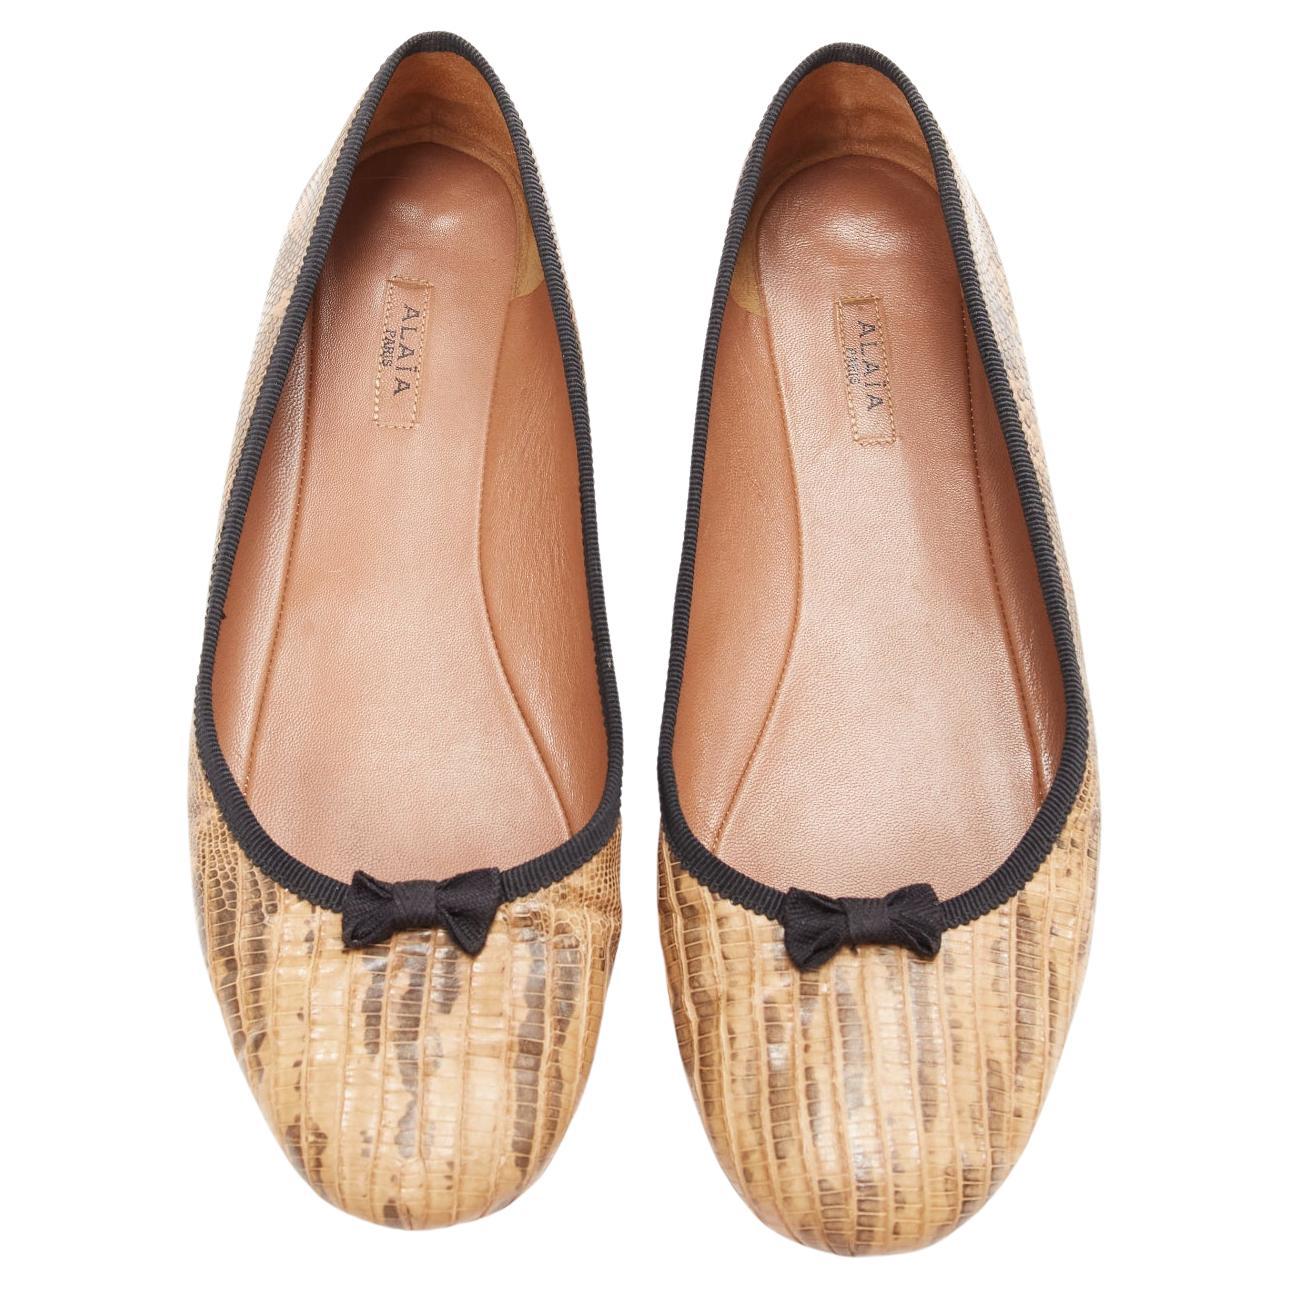 ALAIA brown scaled leather black bow trim ballerina flats shoes EU37 For Sale